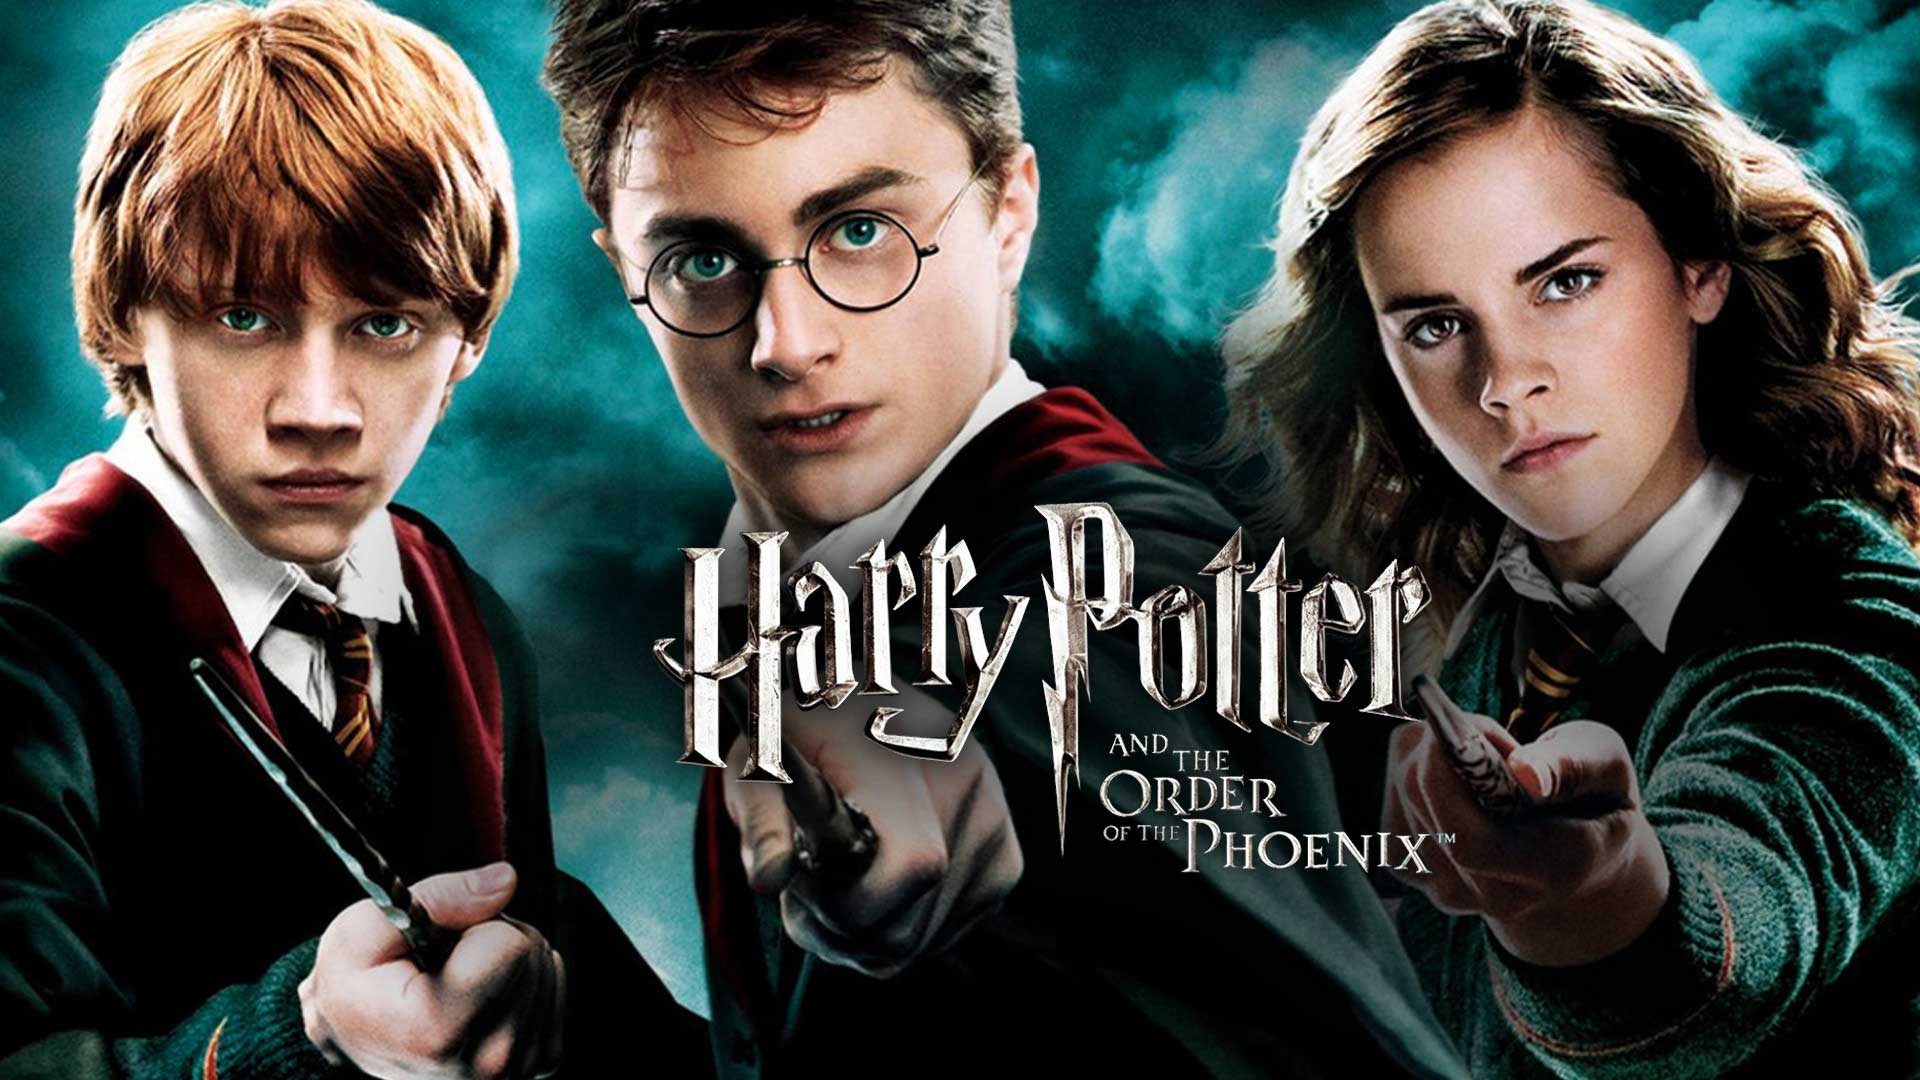 Order of the Phoenix, Movie wallpapers, Posted by Sarah Tremblay, 1920x1080 Full HD Desktop